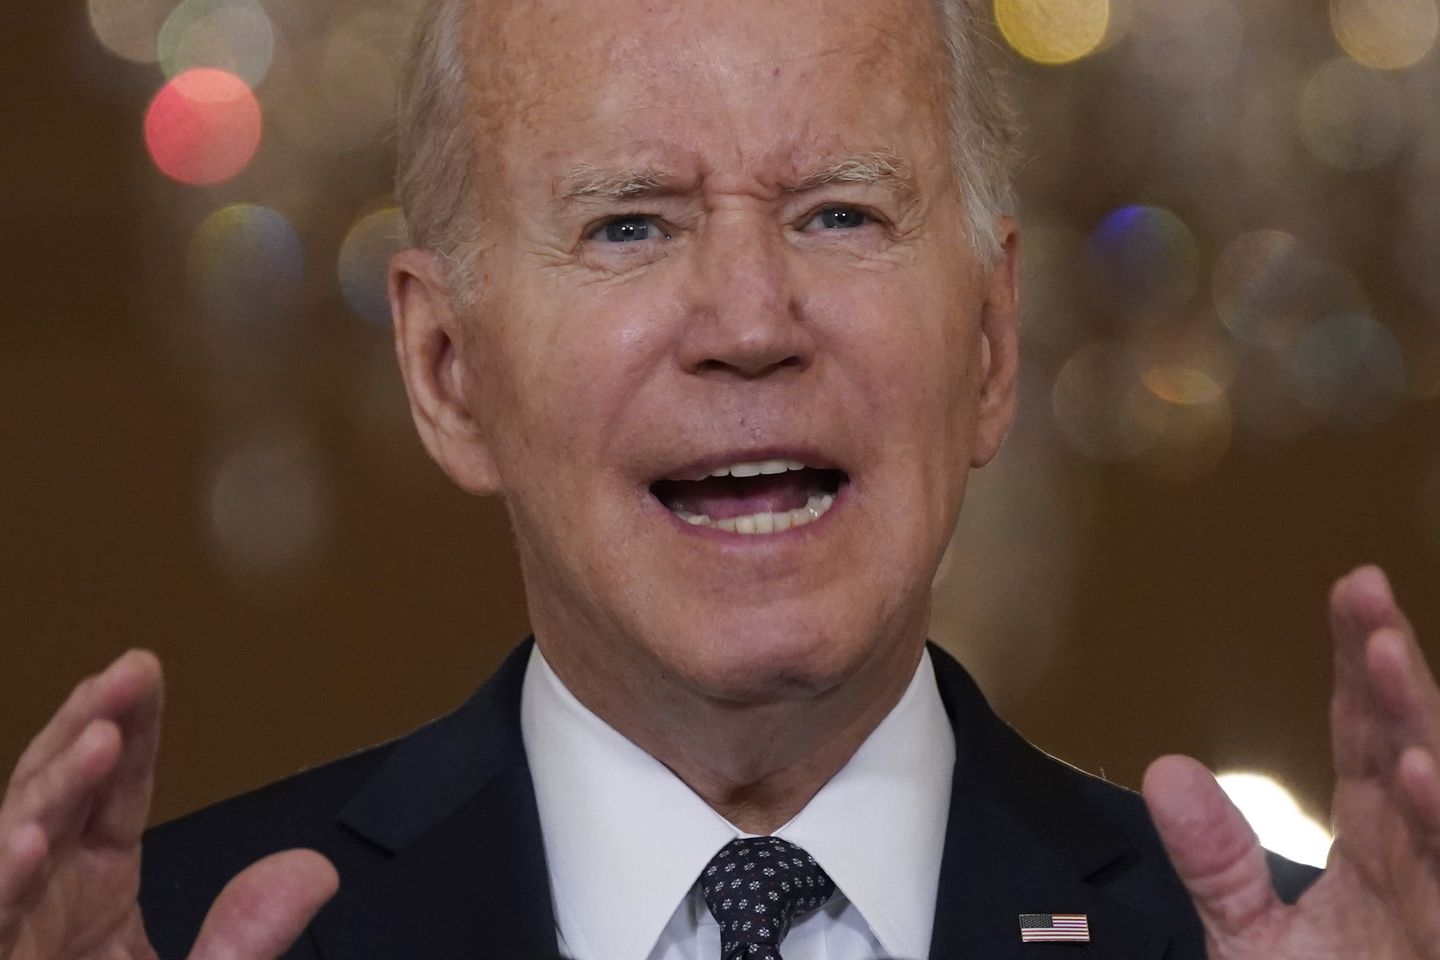 Box labeled 'Important docs' left unsealed on table at Biden's home: Report